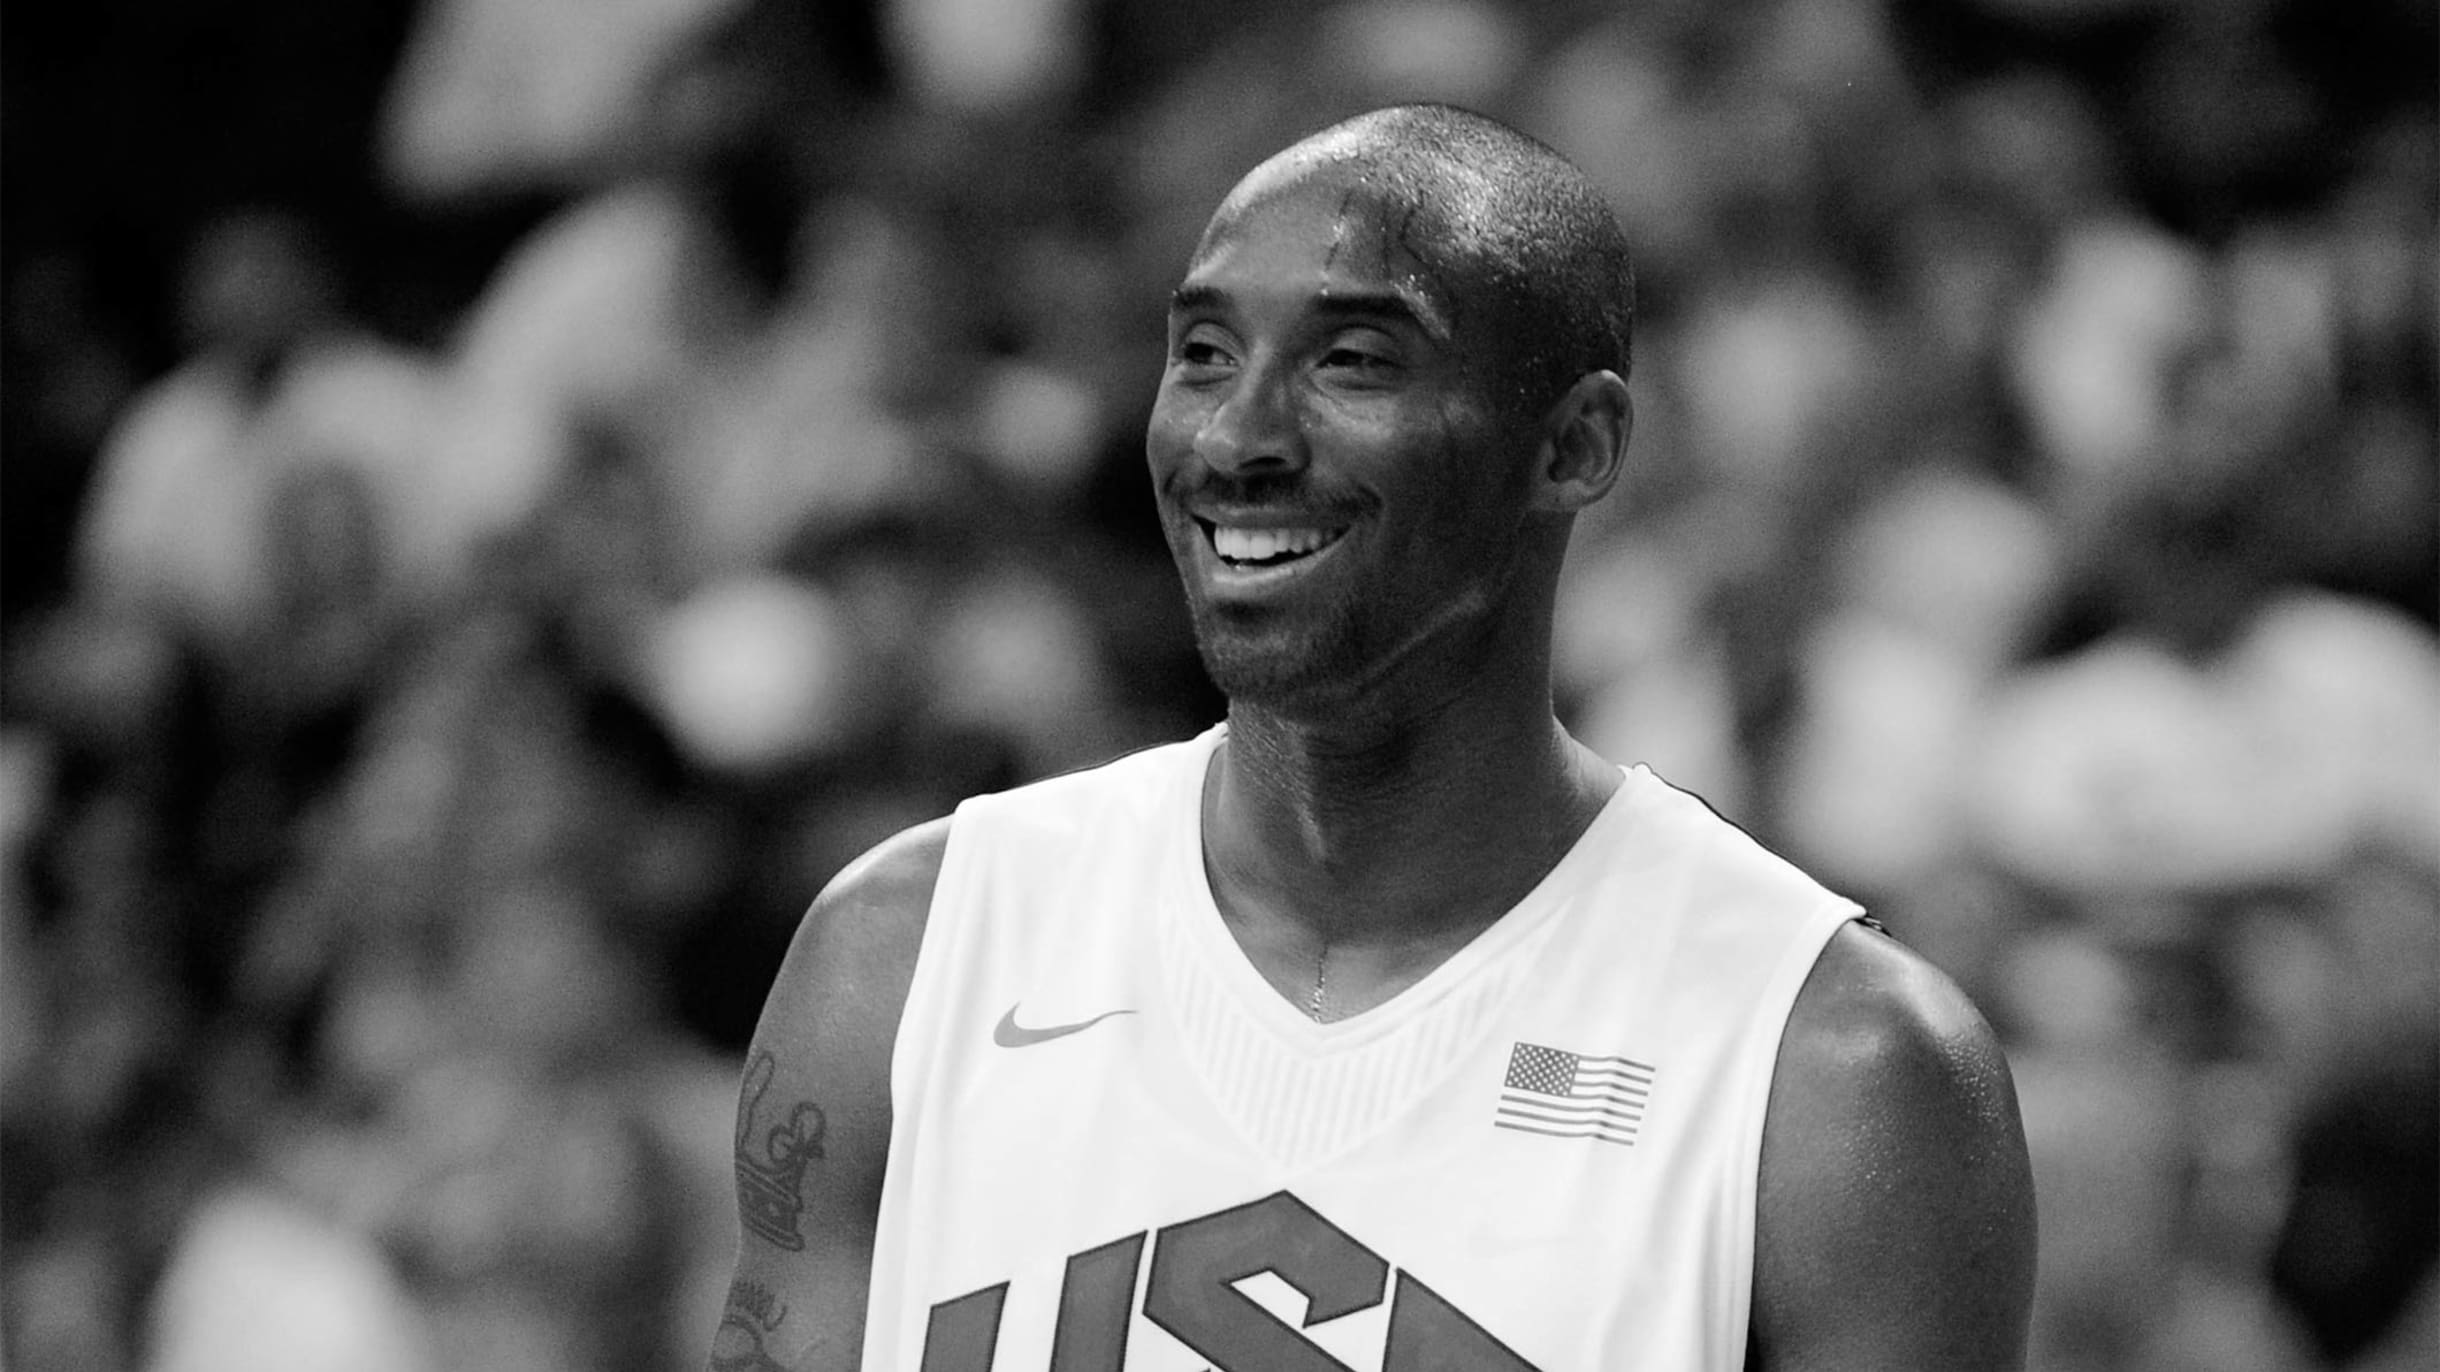 Olympic family mourns the loss of Kobe Bryant - Olympic News